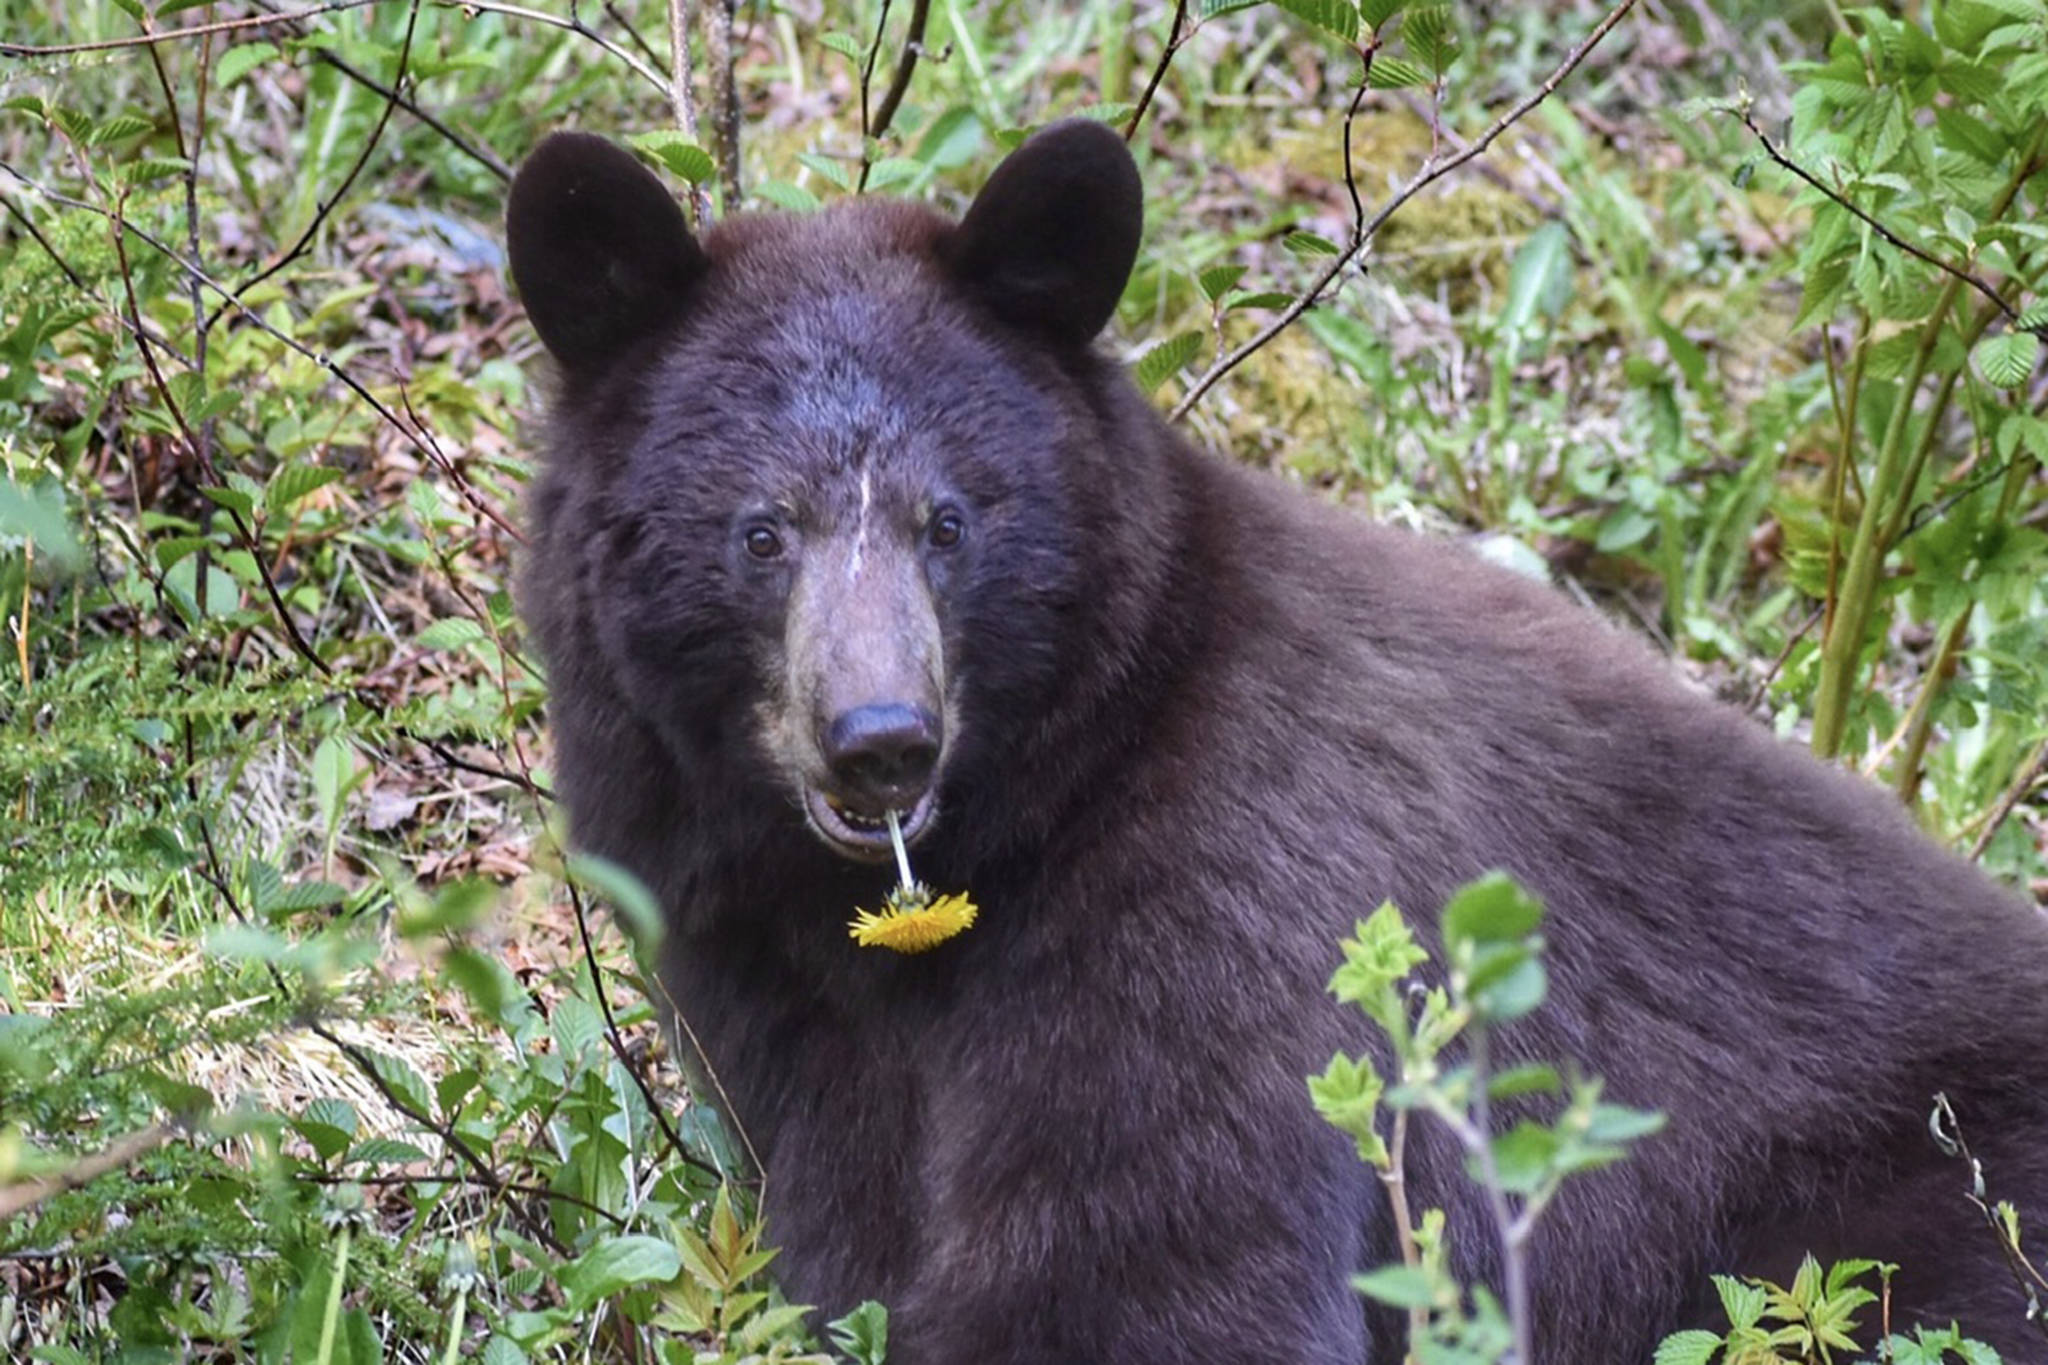 A black bear poses with a dandelion in her mouth near Shrine of St. Therese on May 22, 2021. (Courtesy Photo / Virginia Kelly)